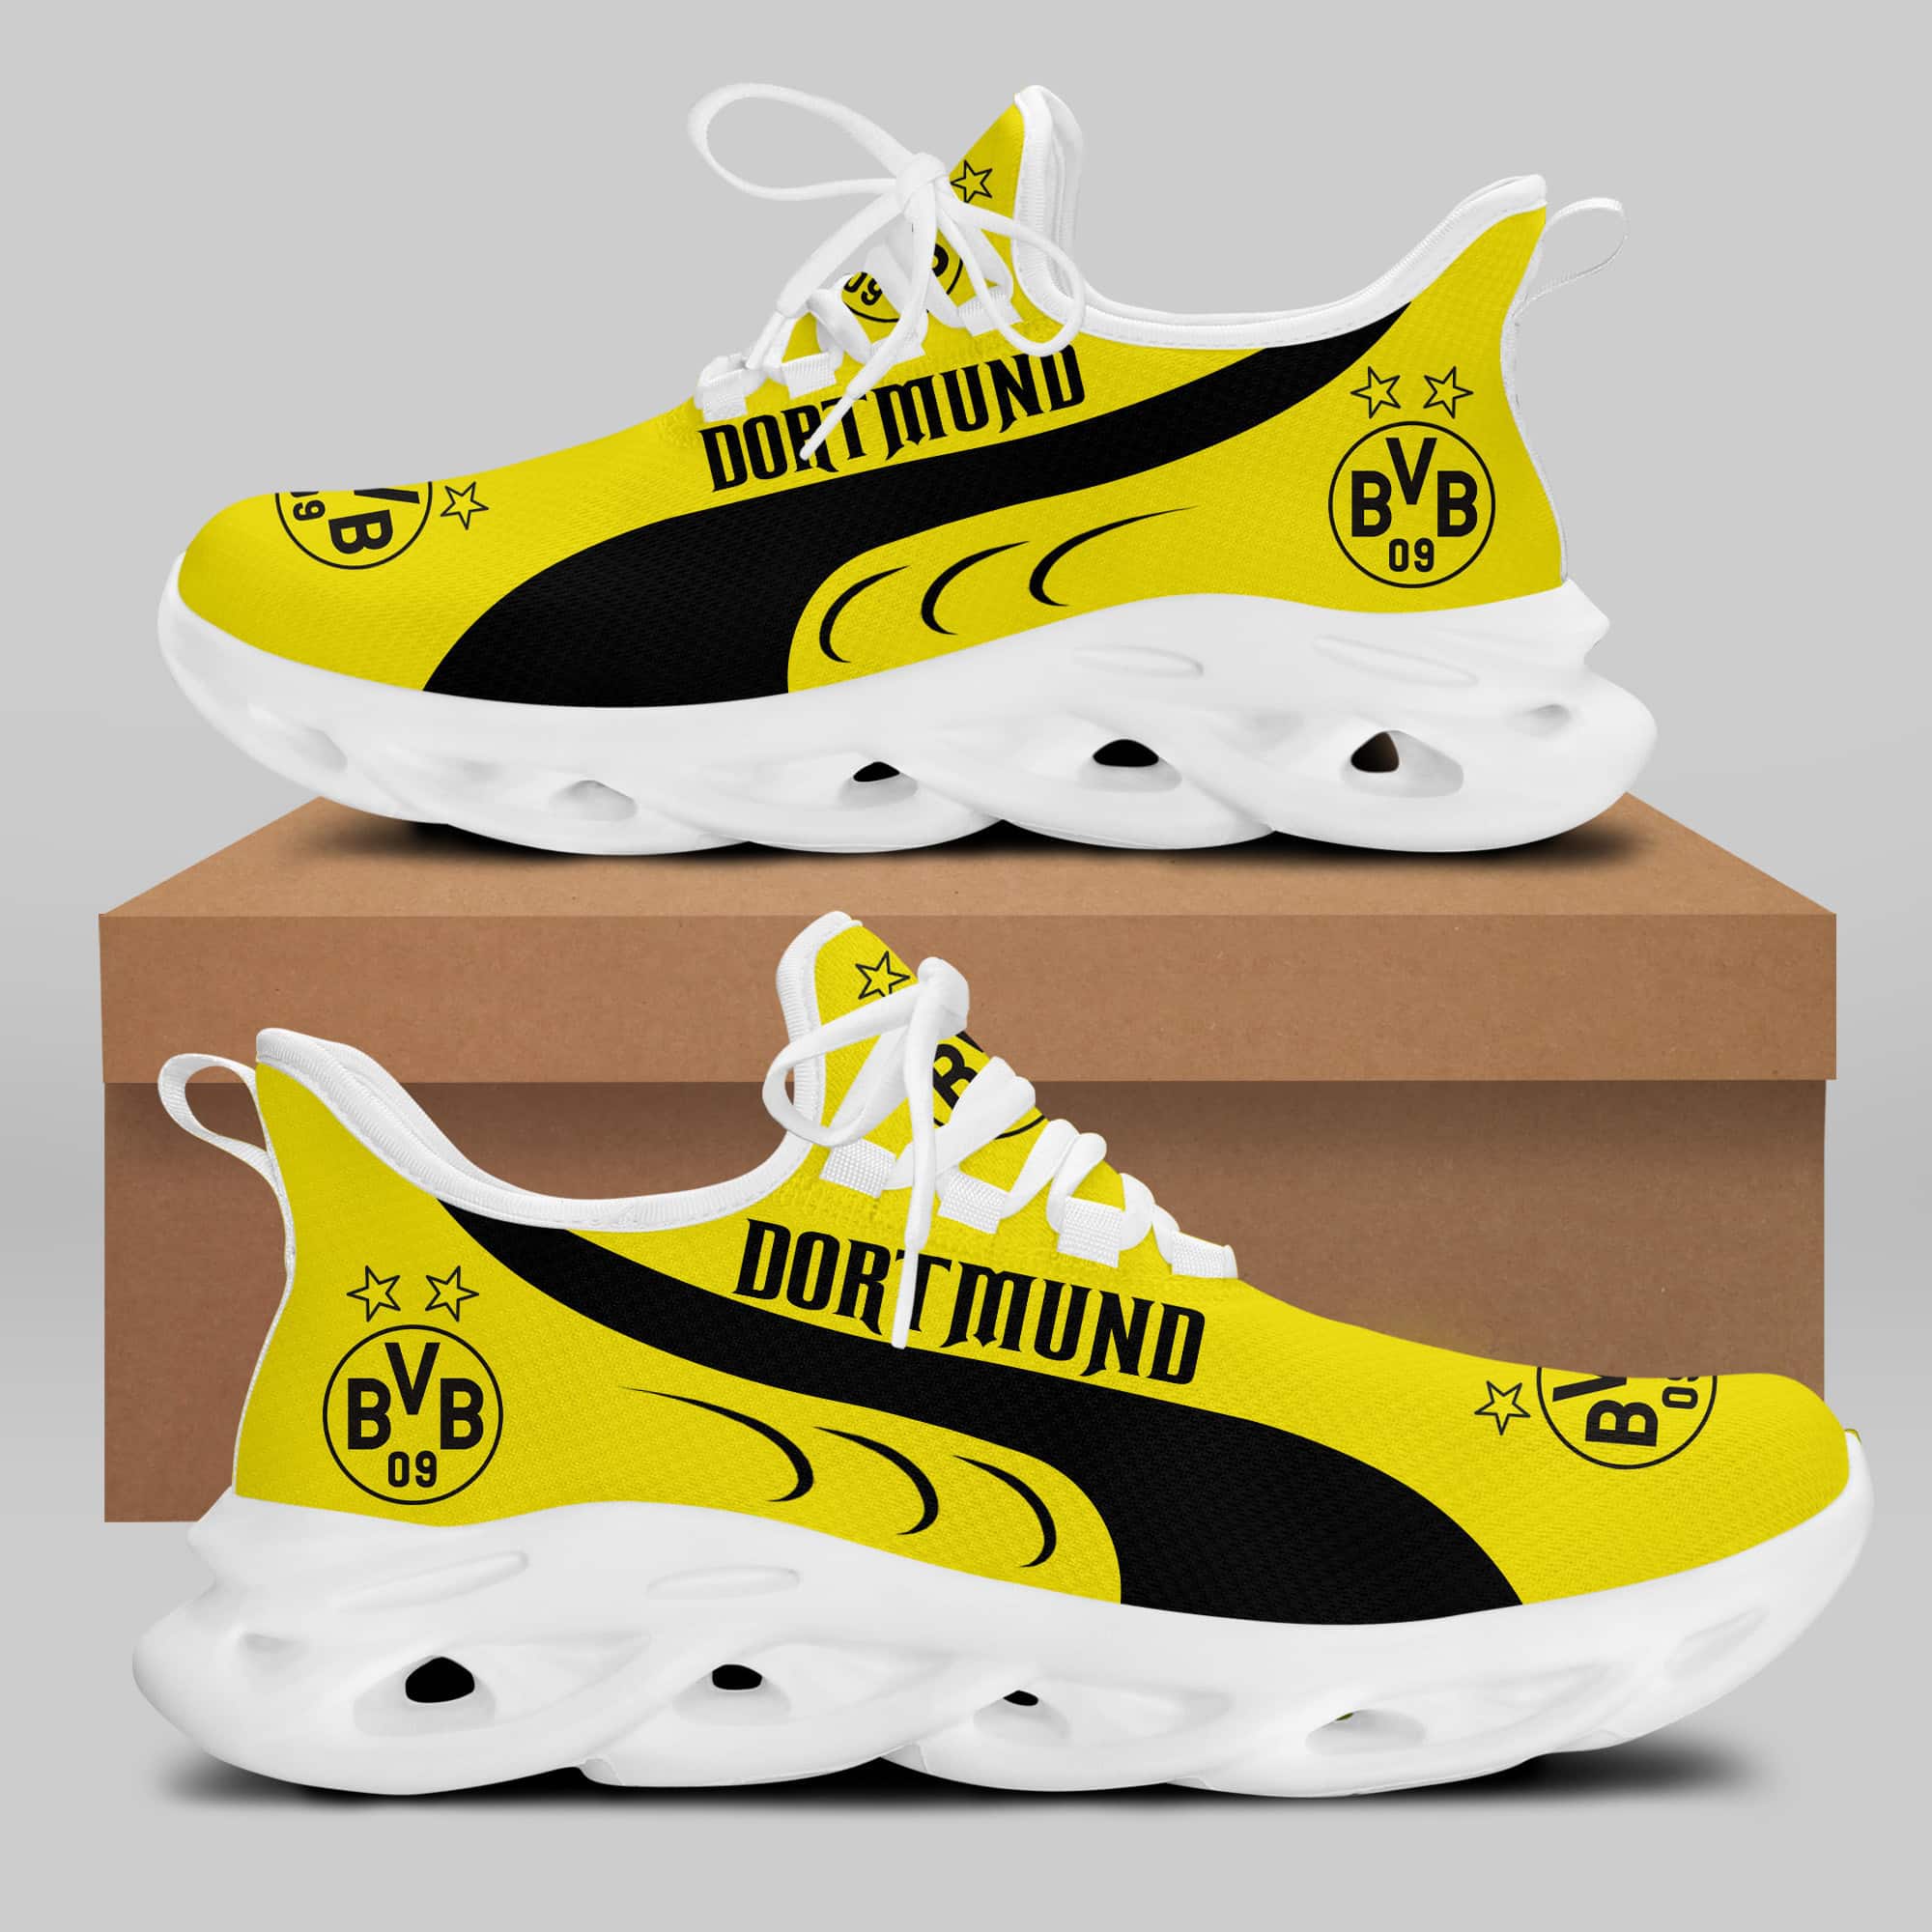 Borussia Dortmund Running Shoes Max Soul Shoes Sneakers Ver 1 2